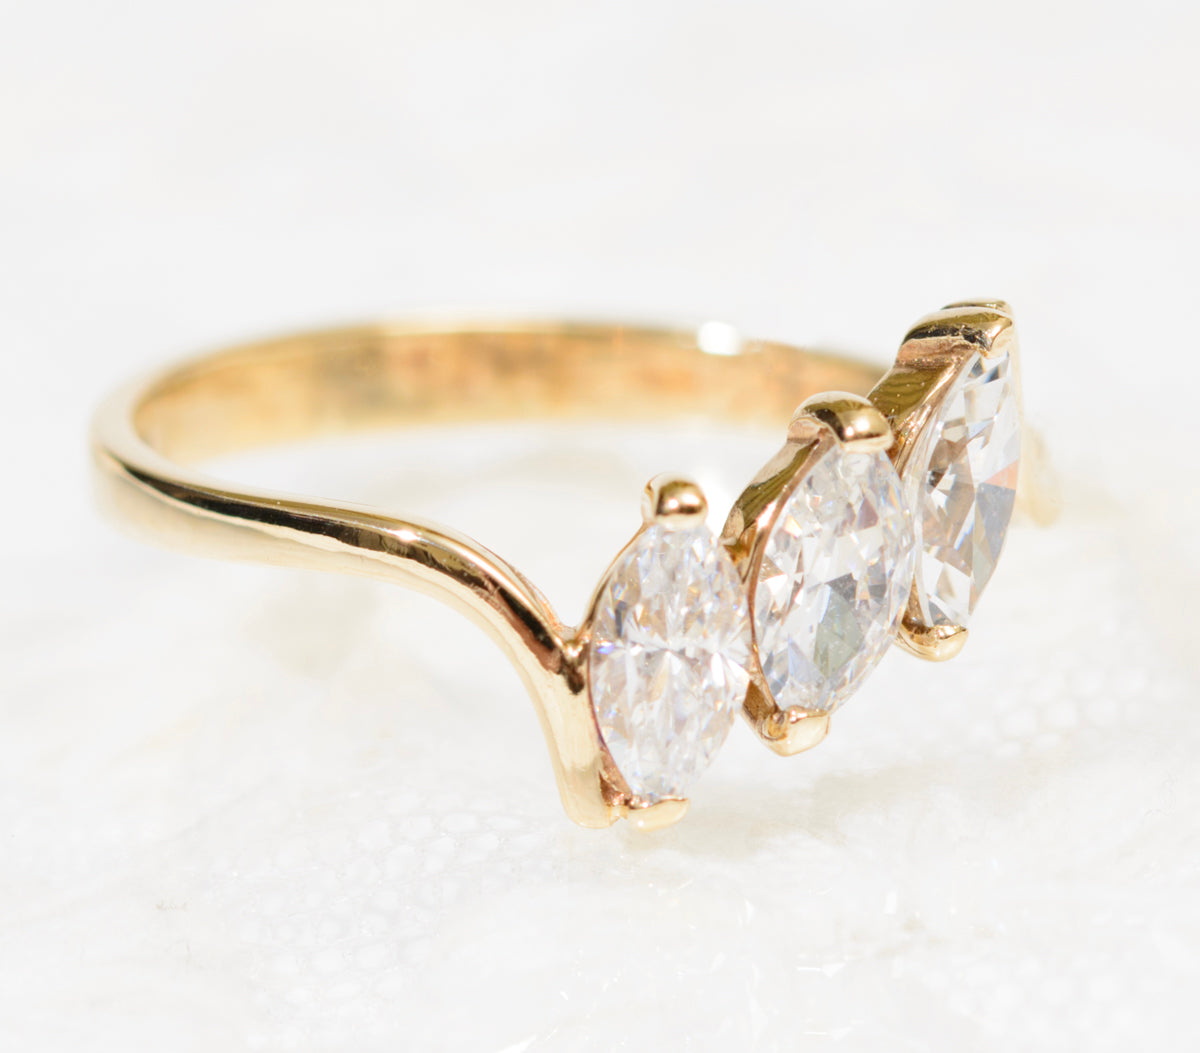 Vintage Gold Ring Hallmarked 9ct Triple Marquise Crystal Gems UK Size M1/2 (A1926)